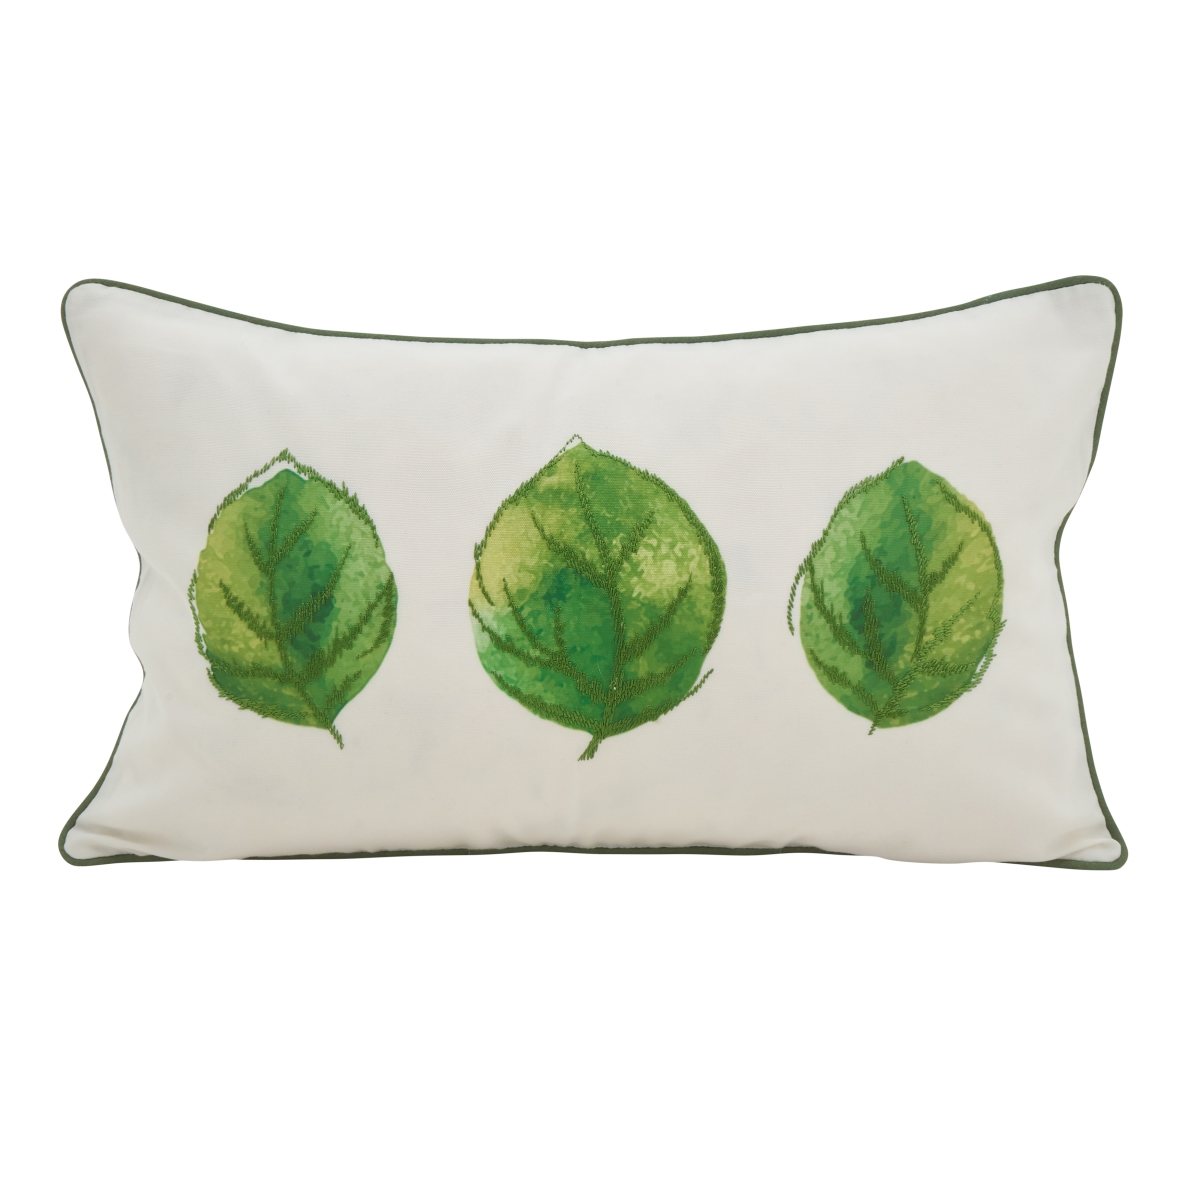 172.g1220b 12 X 20 In. Petite Fleur Rectangle Three Leaves Embroidered Down Filled Throw Pillow - Green